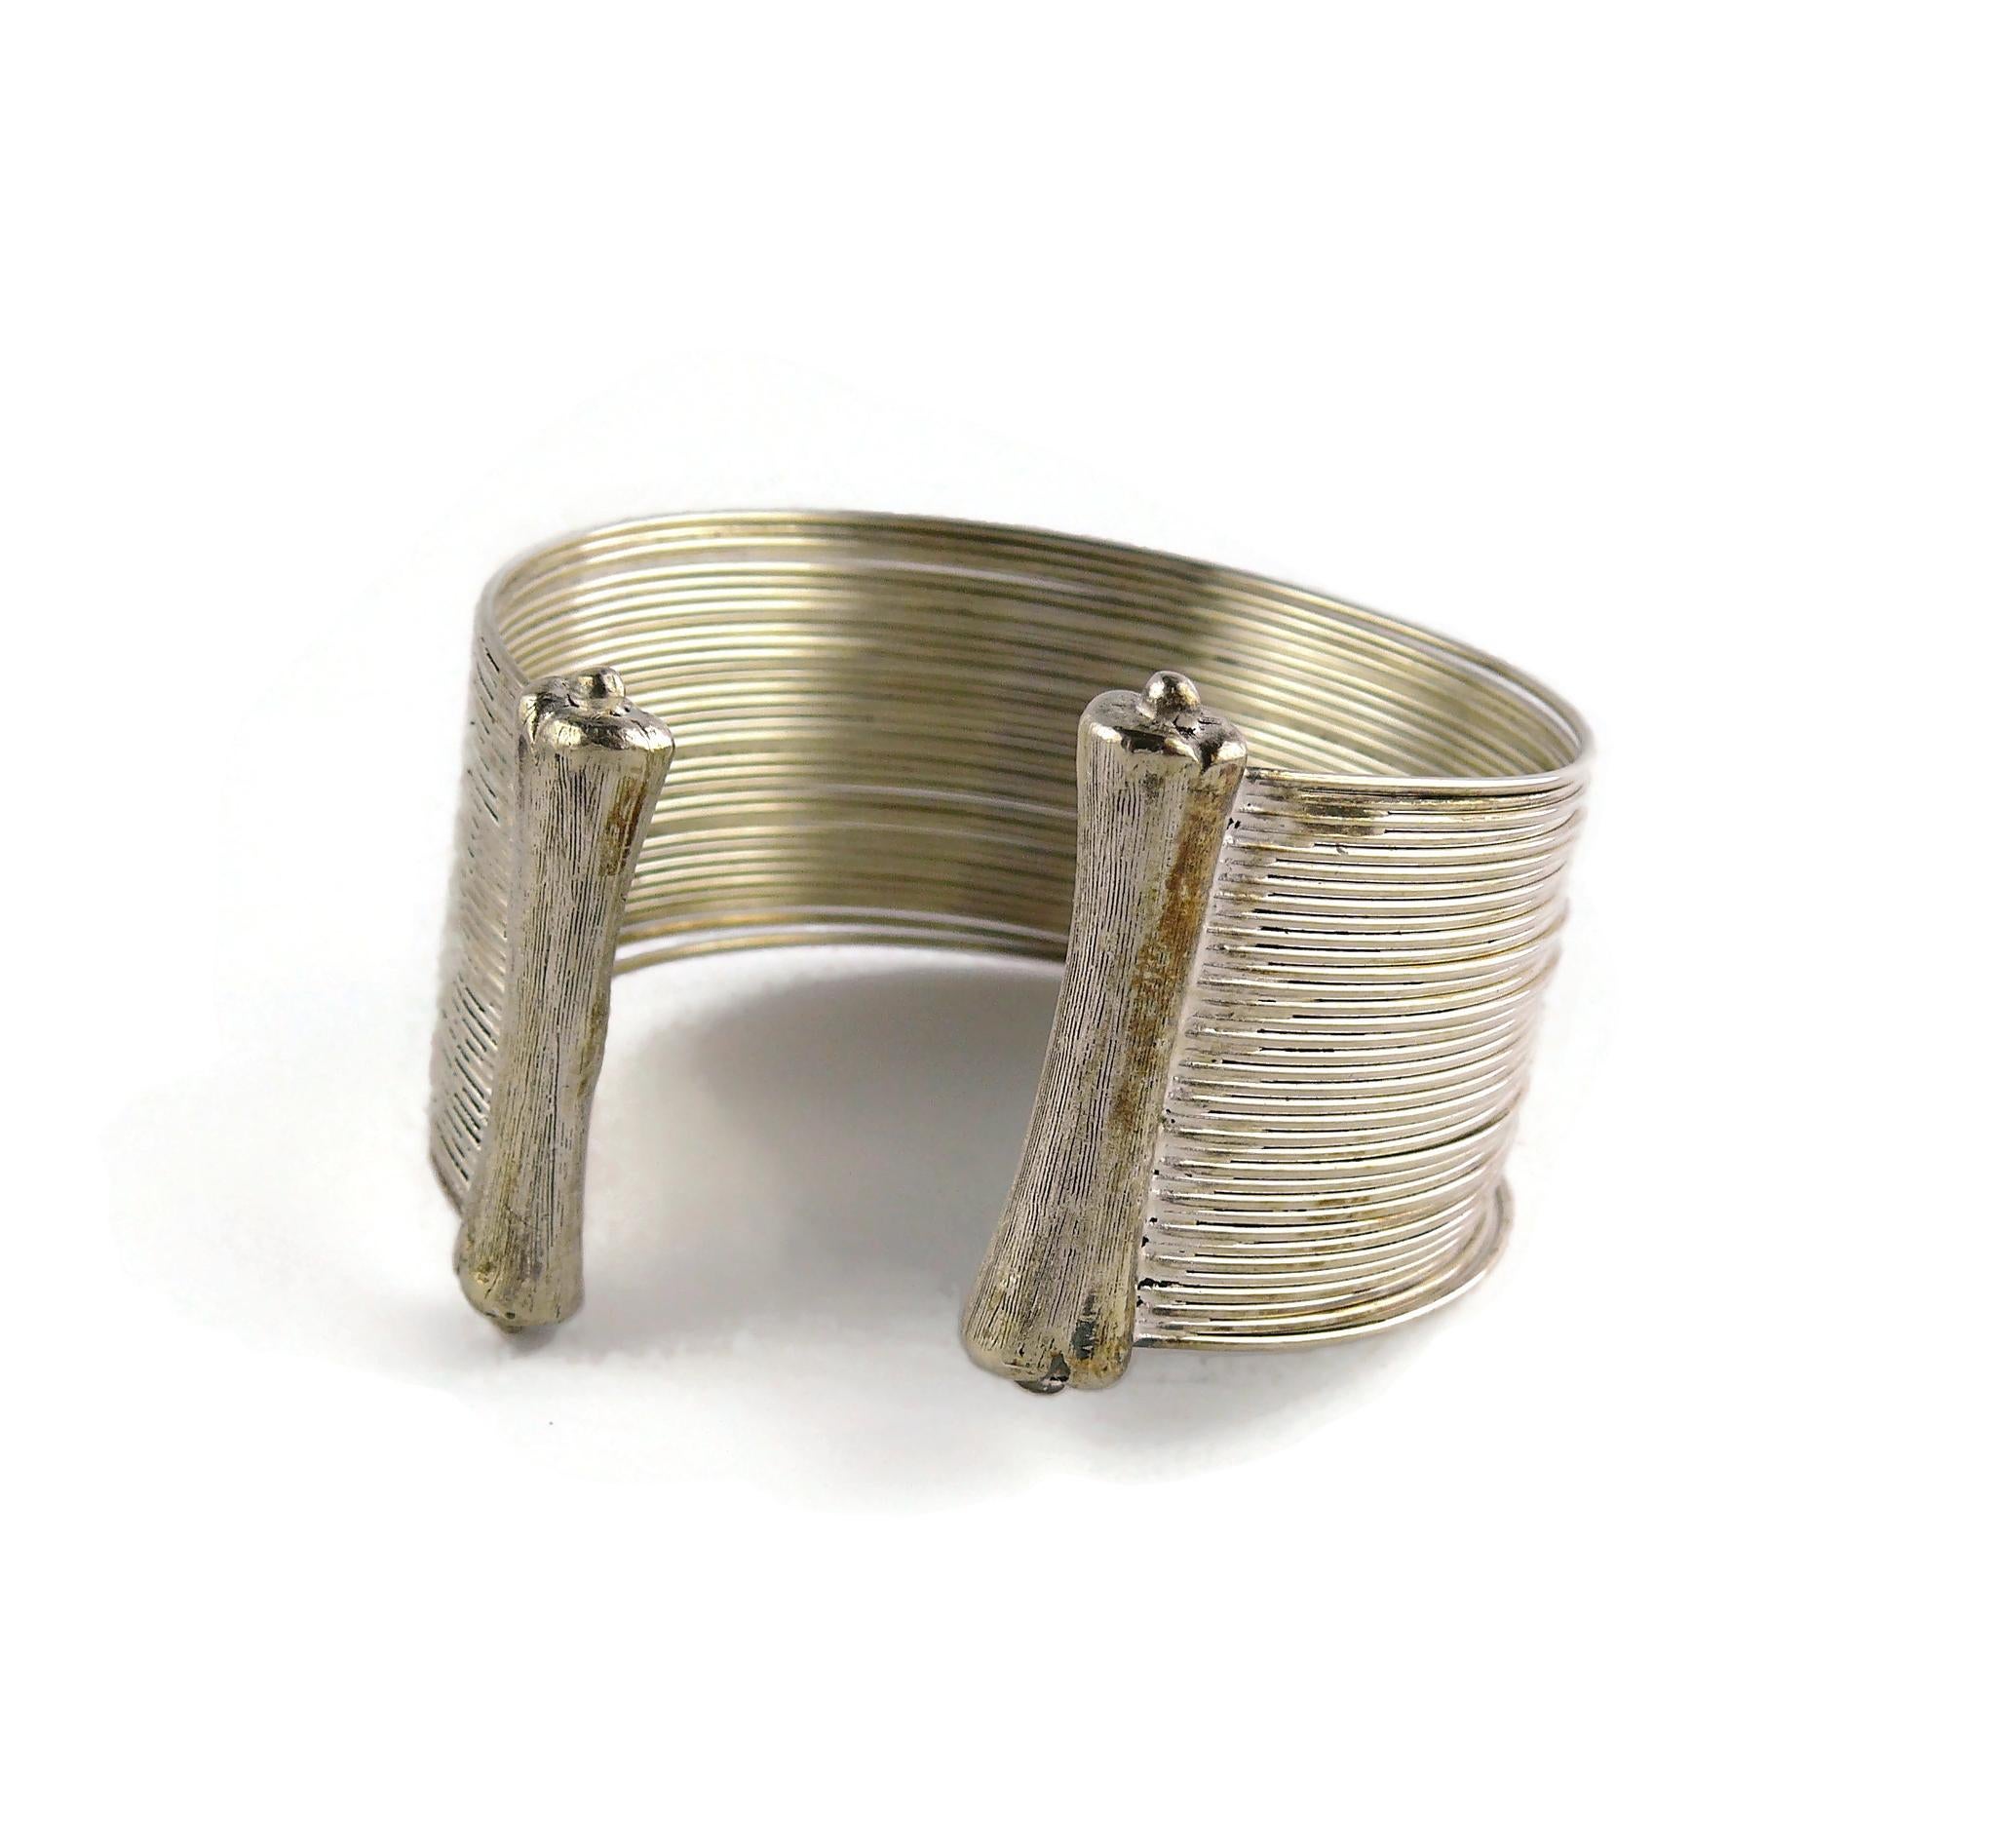 Christian Dior Boutique Vintage Silver Toned Wire Cuff Bracelet For Sale 2